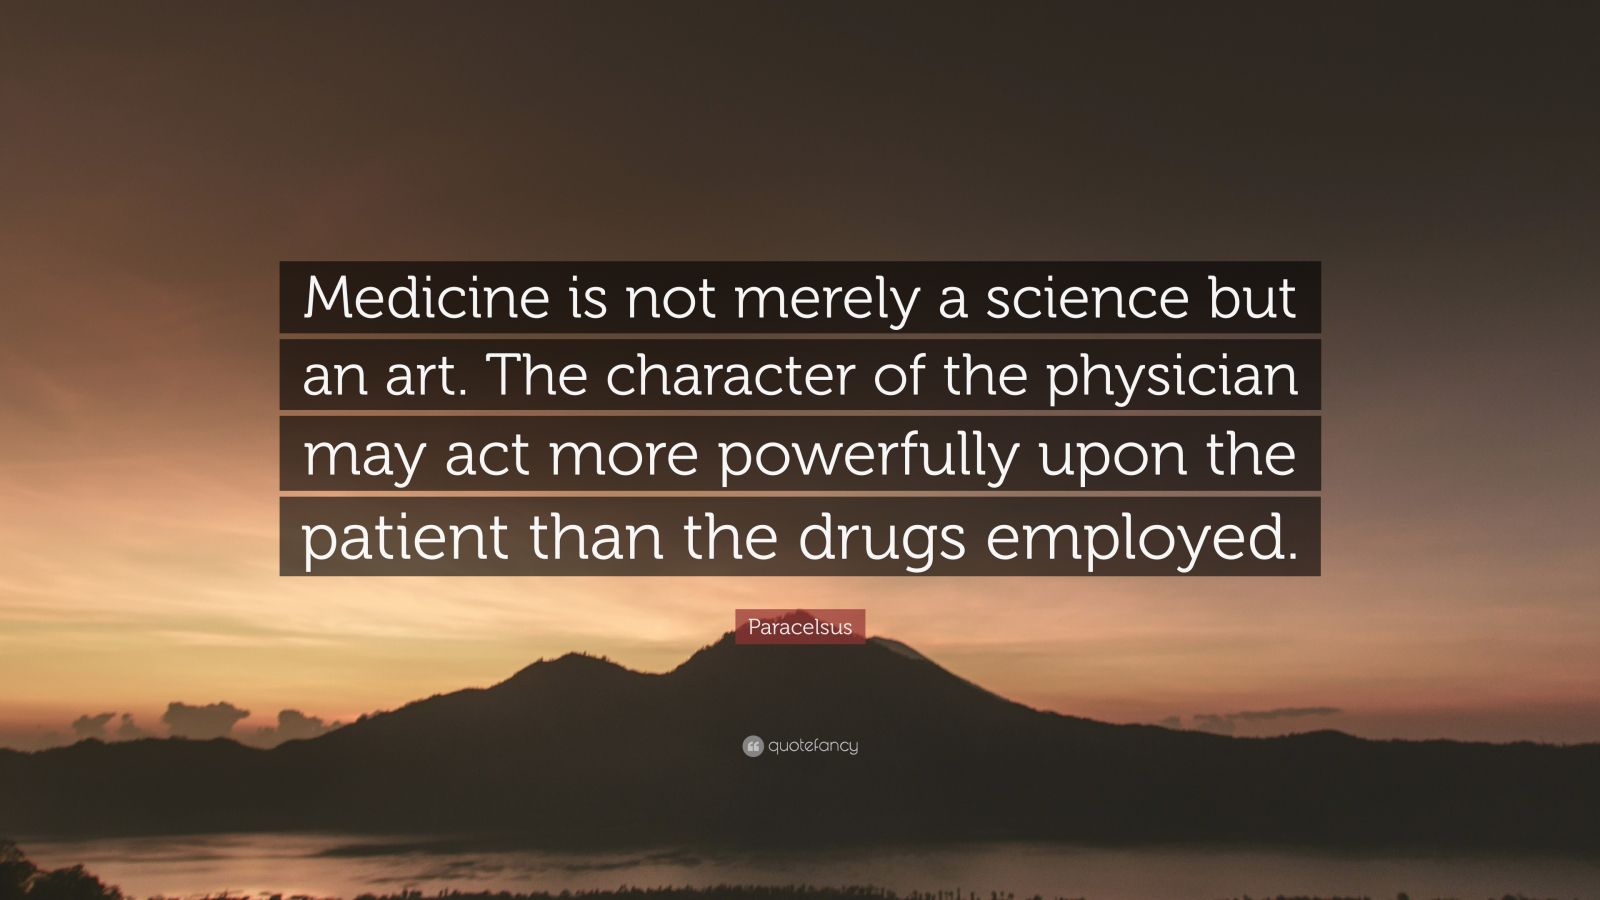 Paracelsus Quote “Medicine is not merely a science but an